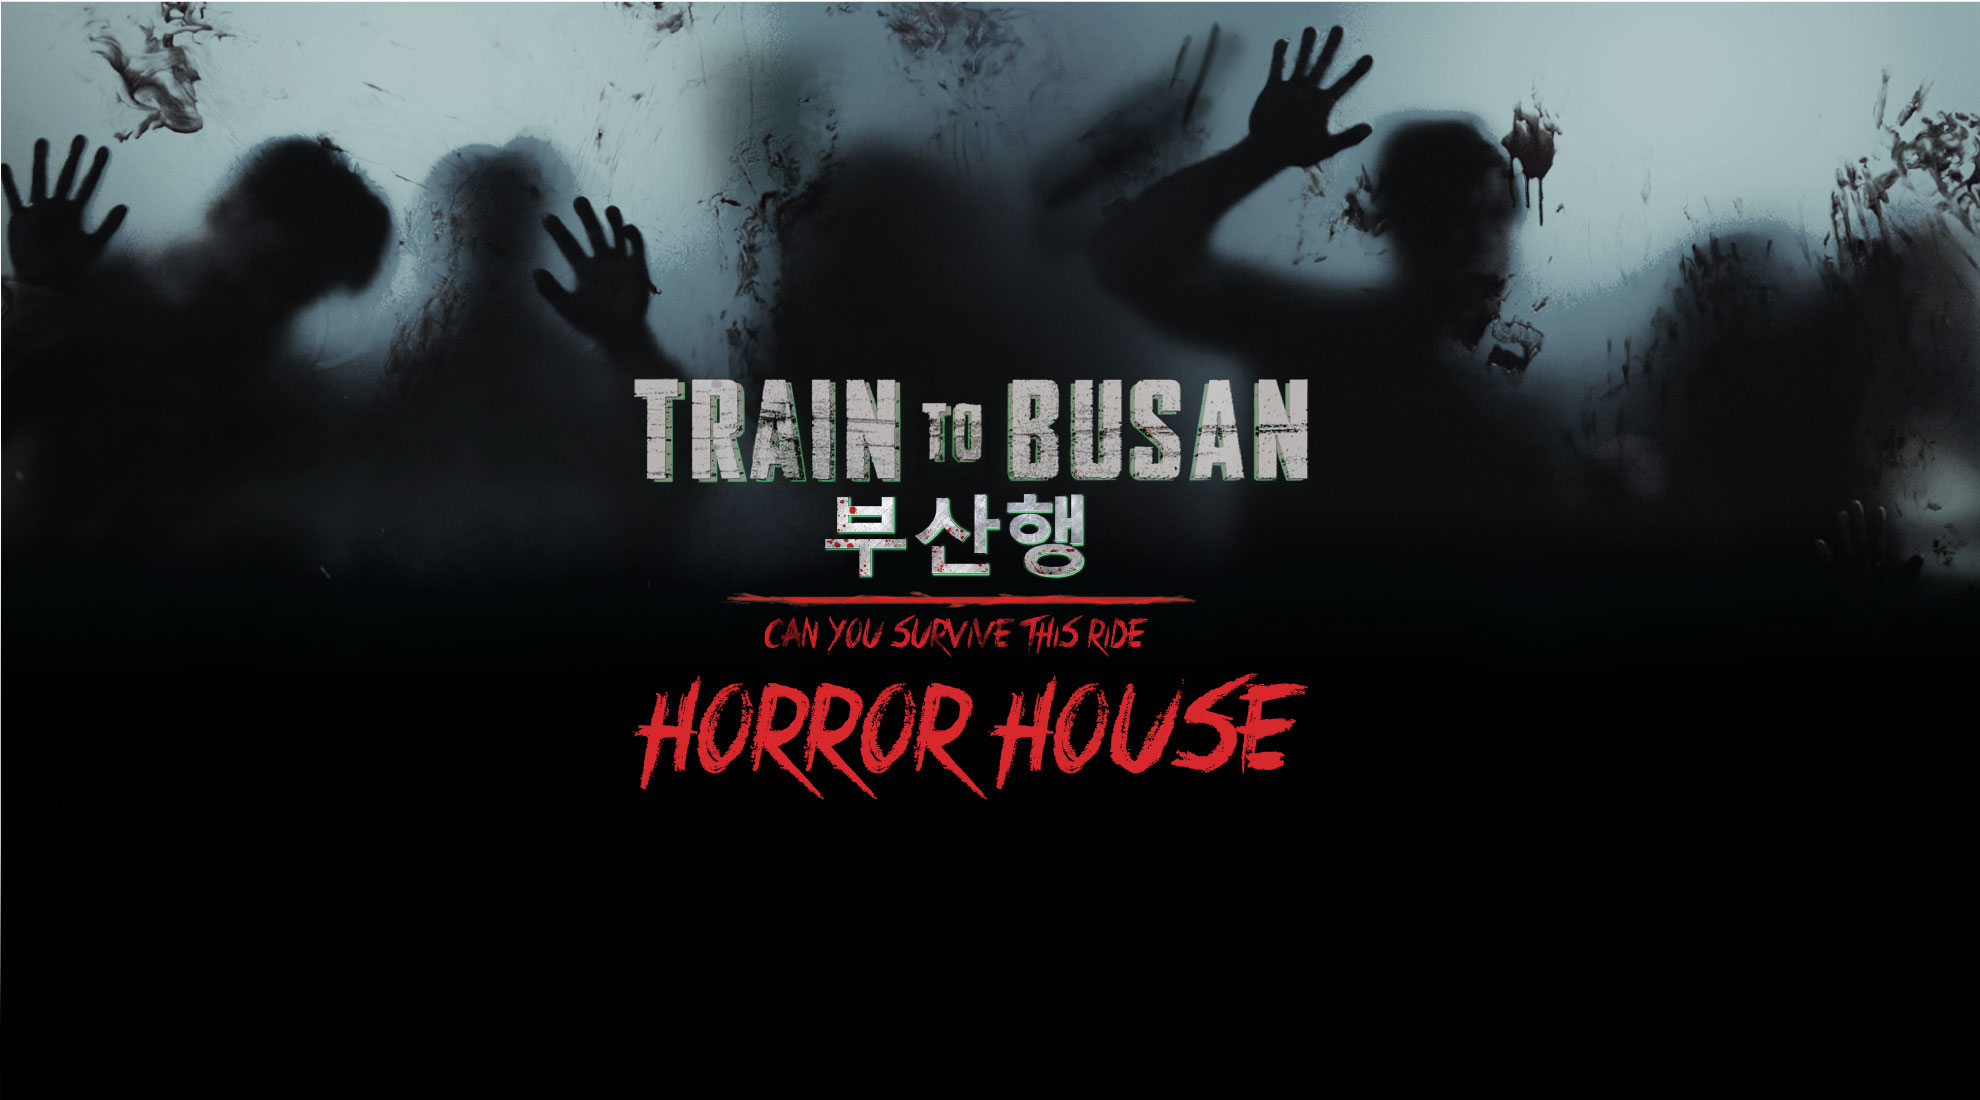 Deals-AirAsia-Train_to_Busan_Horror_House_Admission_Ticket_in_Resorts_World_Genting